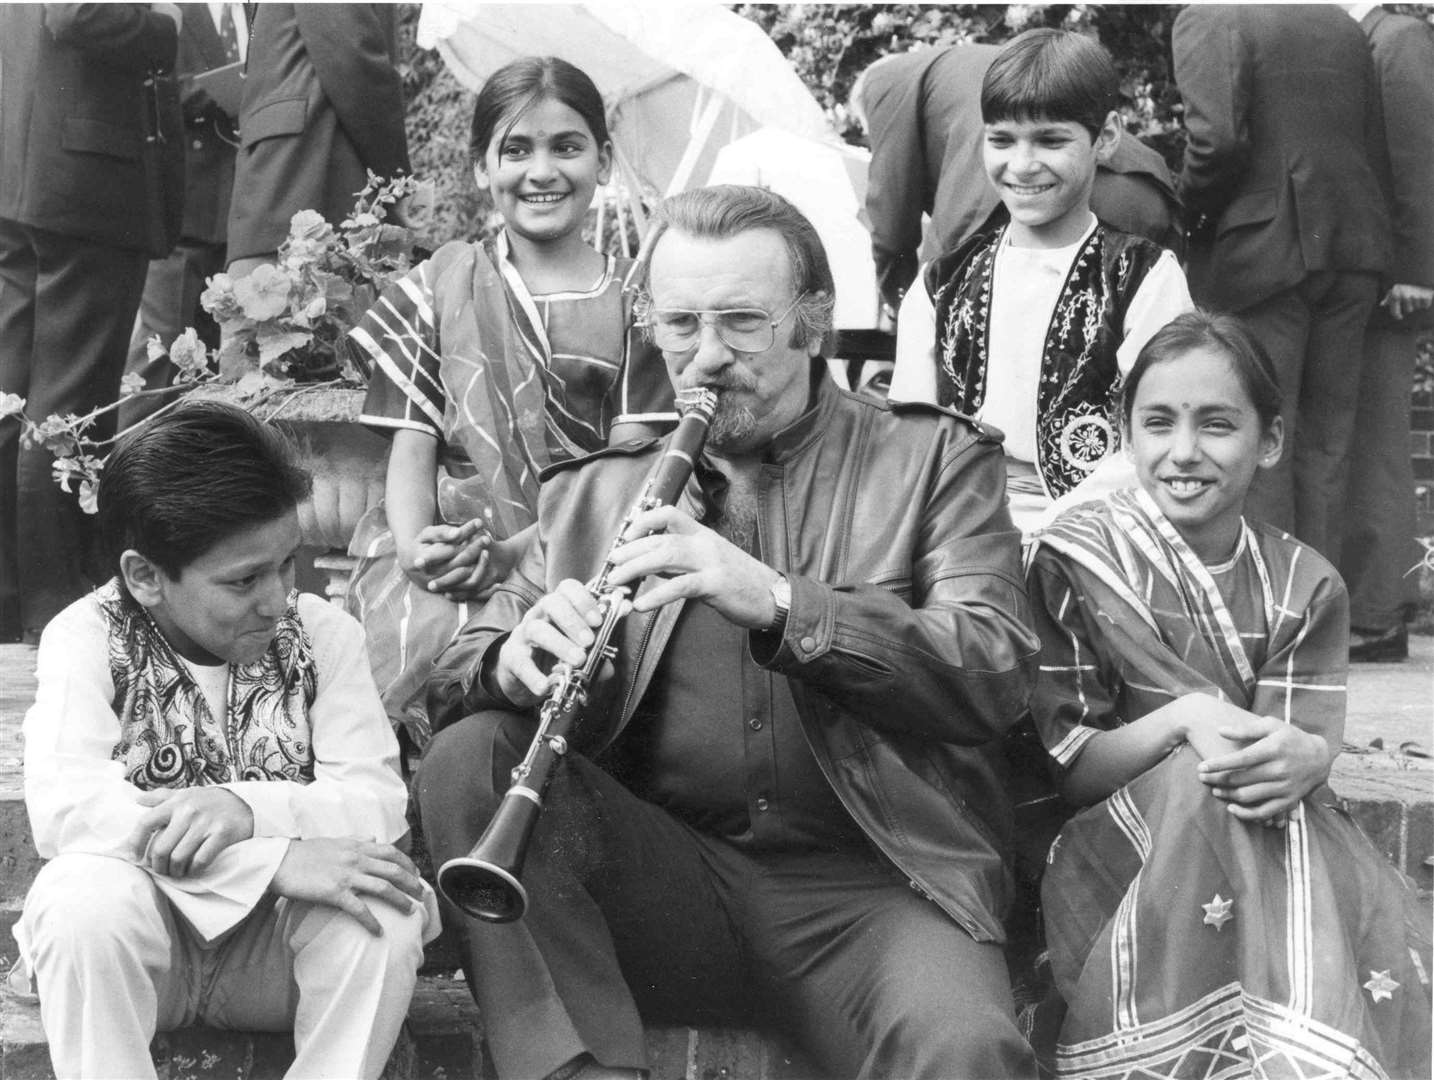 Jazz musician Acker Bilk joins Indian dancers at a charity garden party at the Walnut Tree in Yalding in September 1986